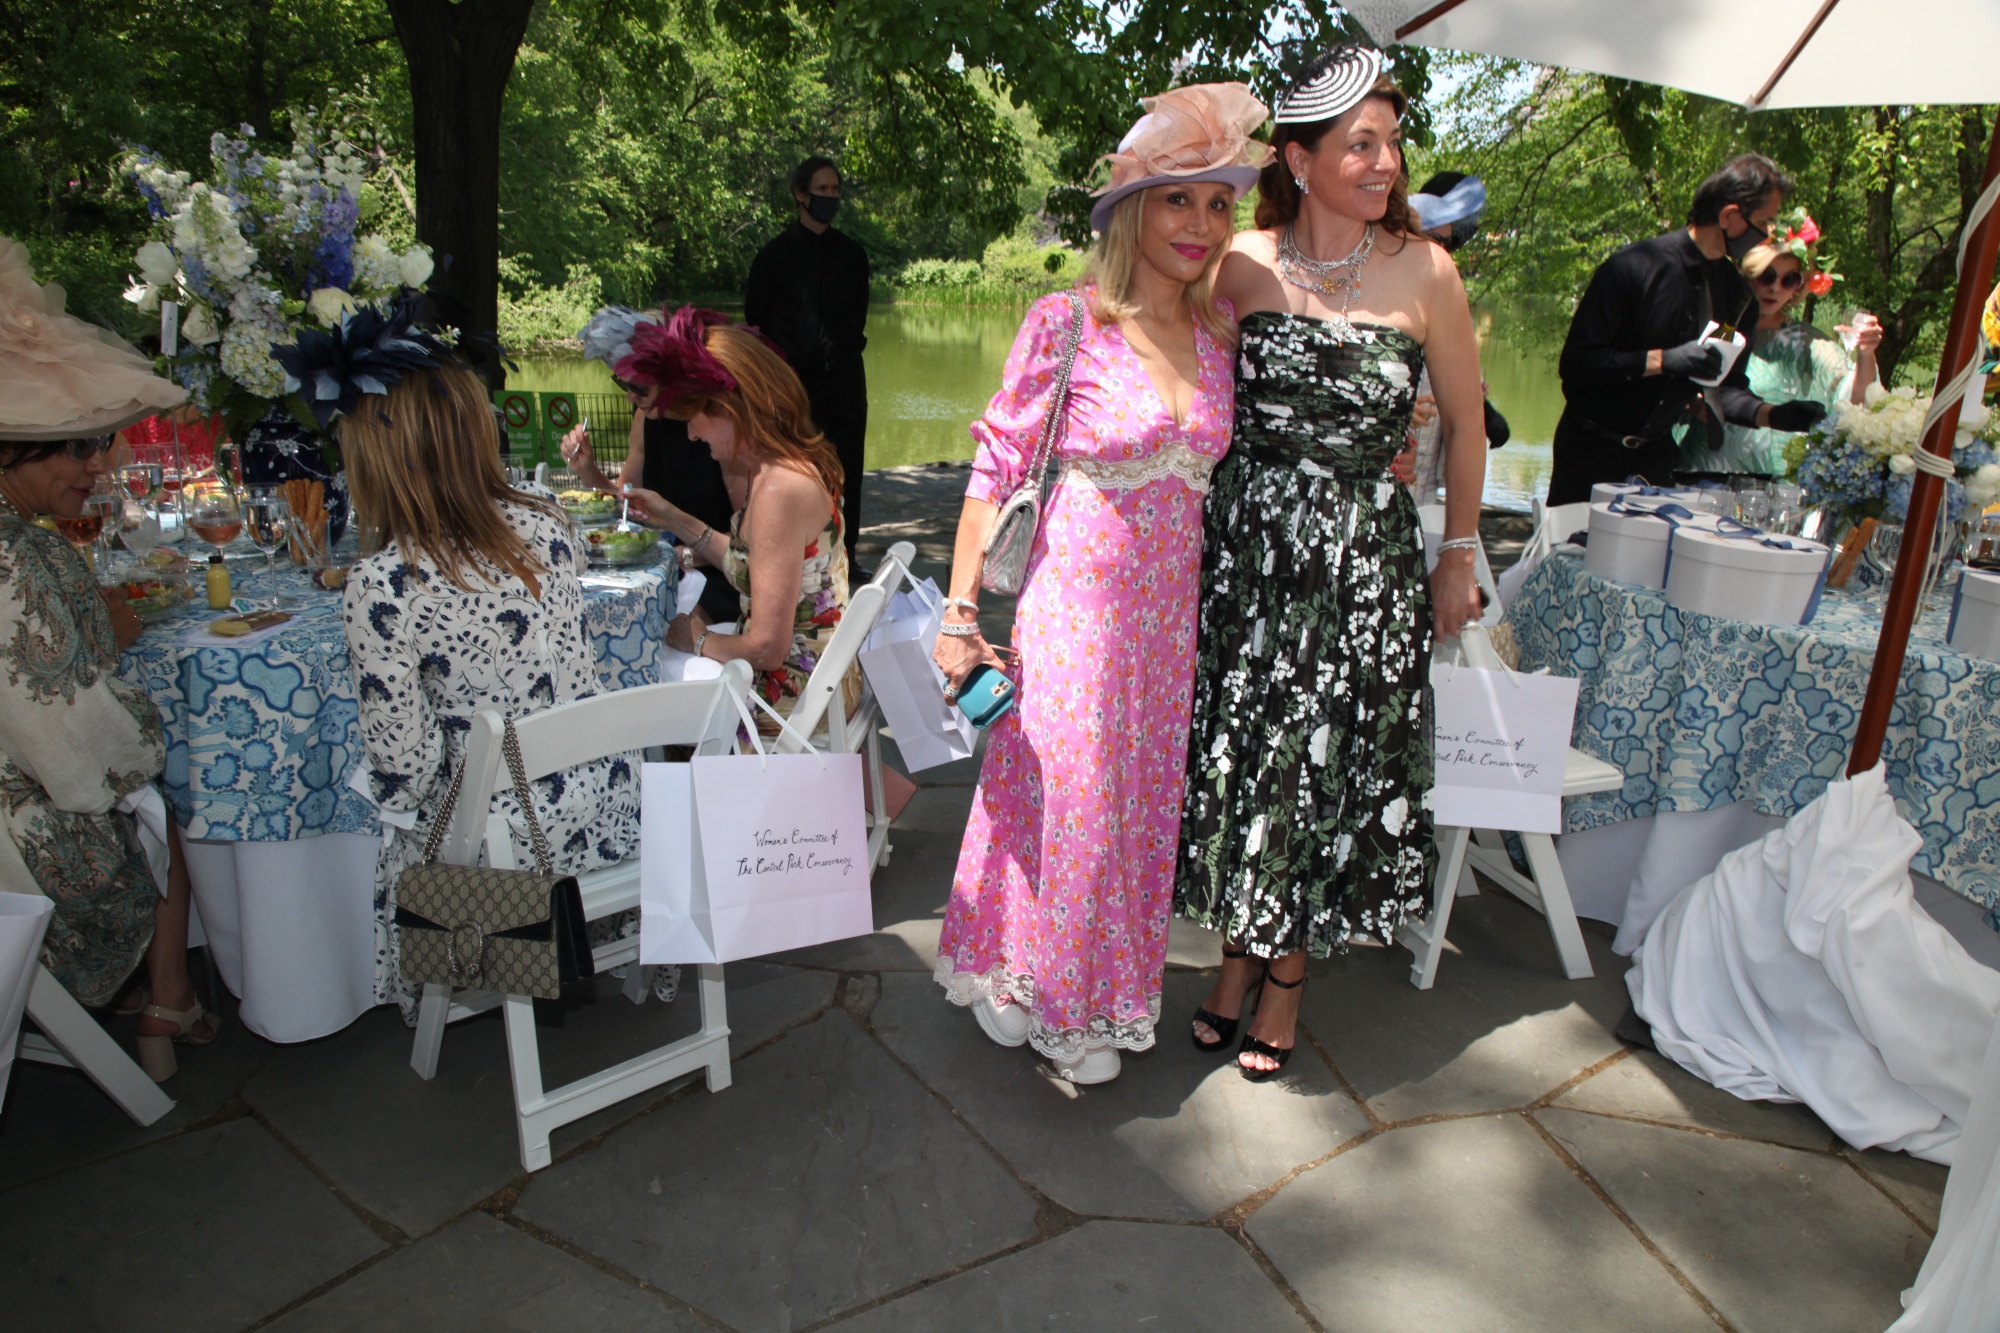 Nicole Salmasi and Allison Mignone at the hat lunch.